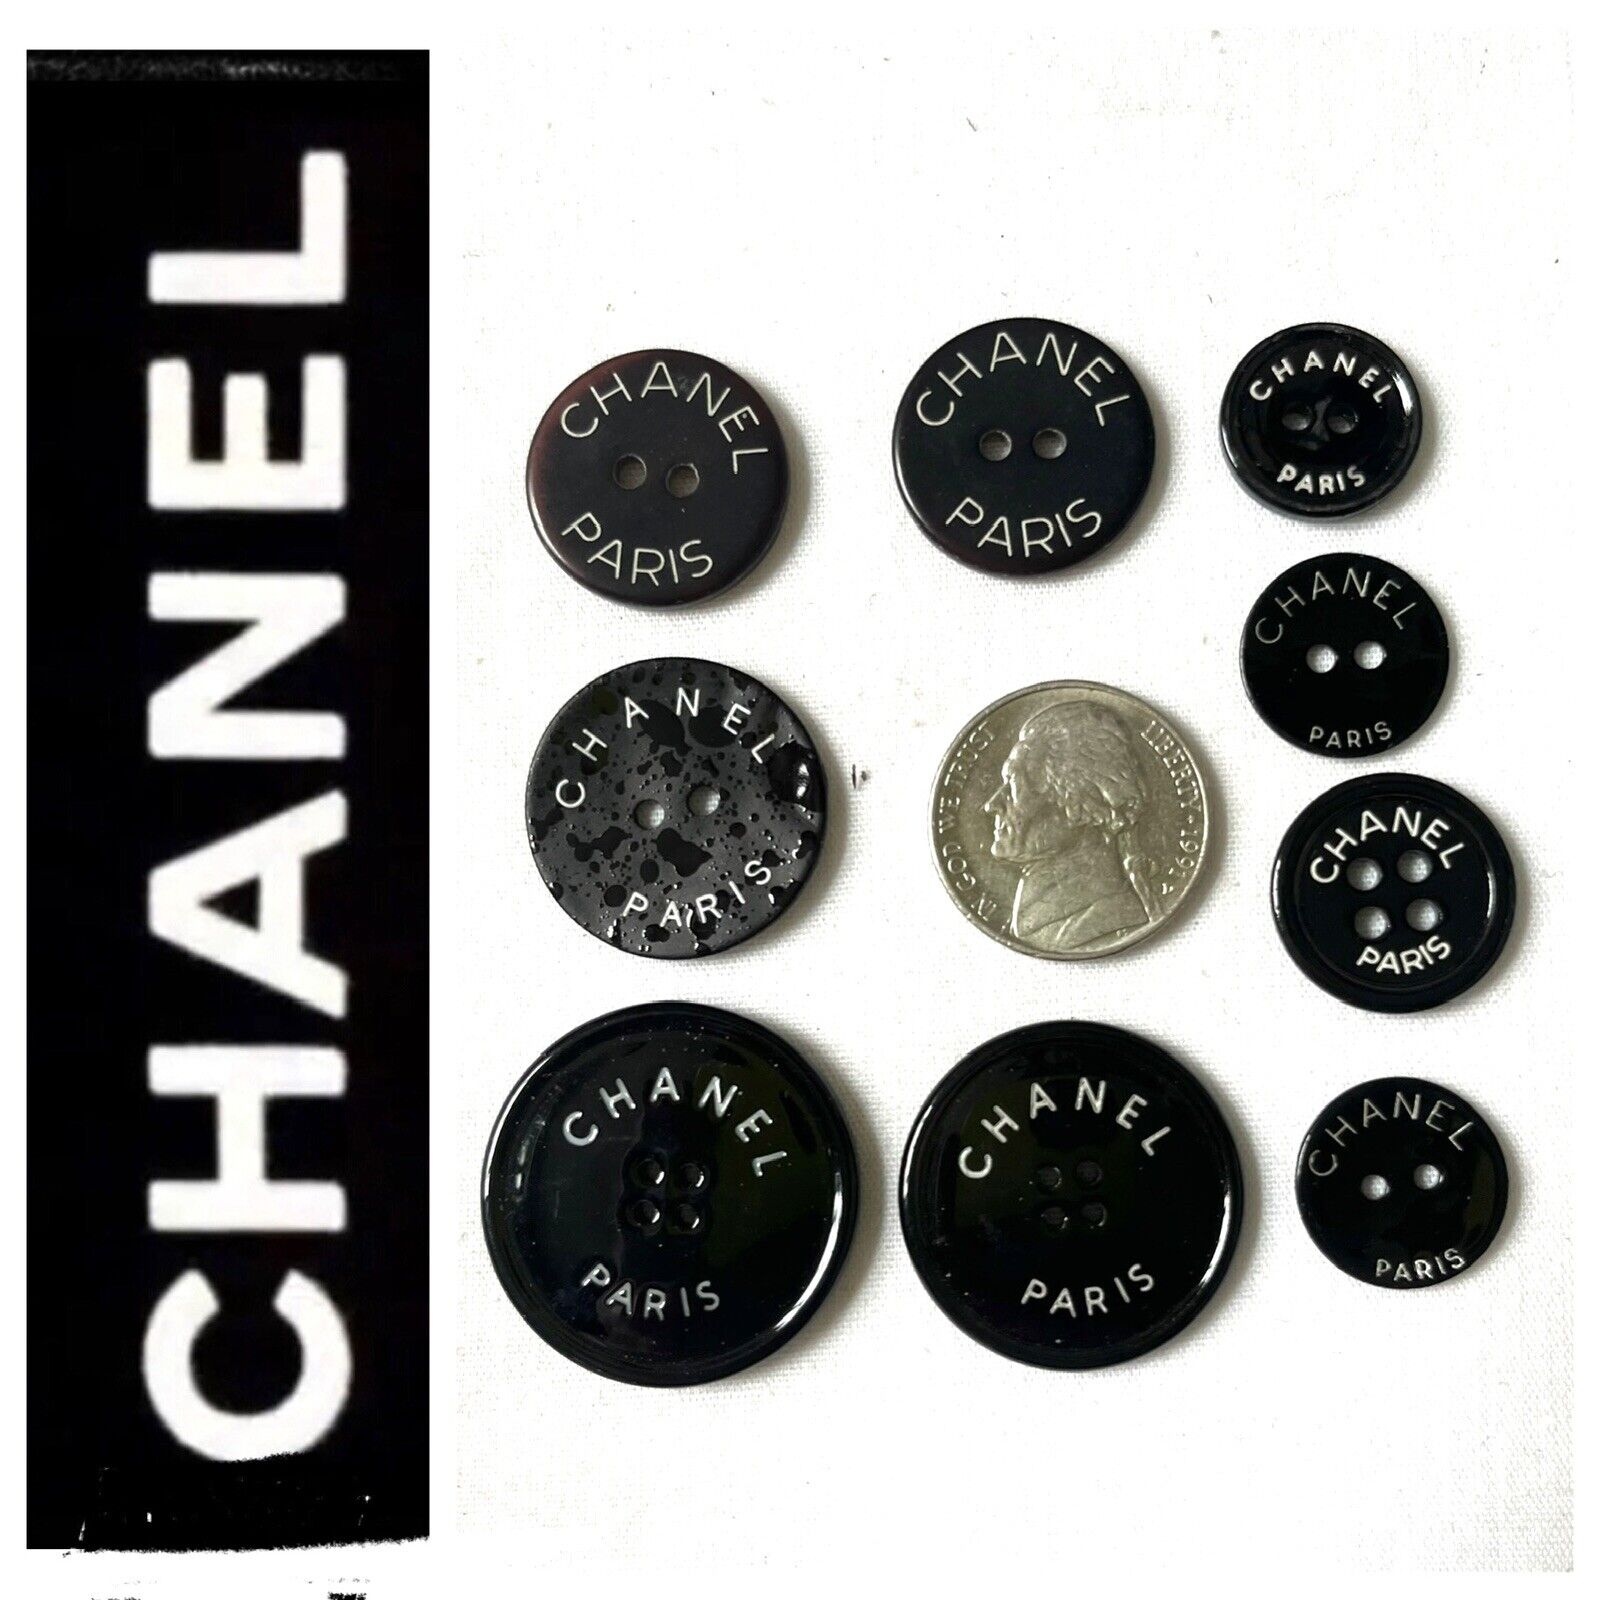 Lot Of 9 Authentic Chanel Buttons Black lettering, CHANEL PAIRS MIX SIZE